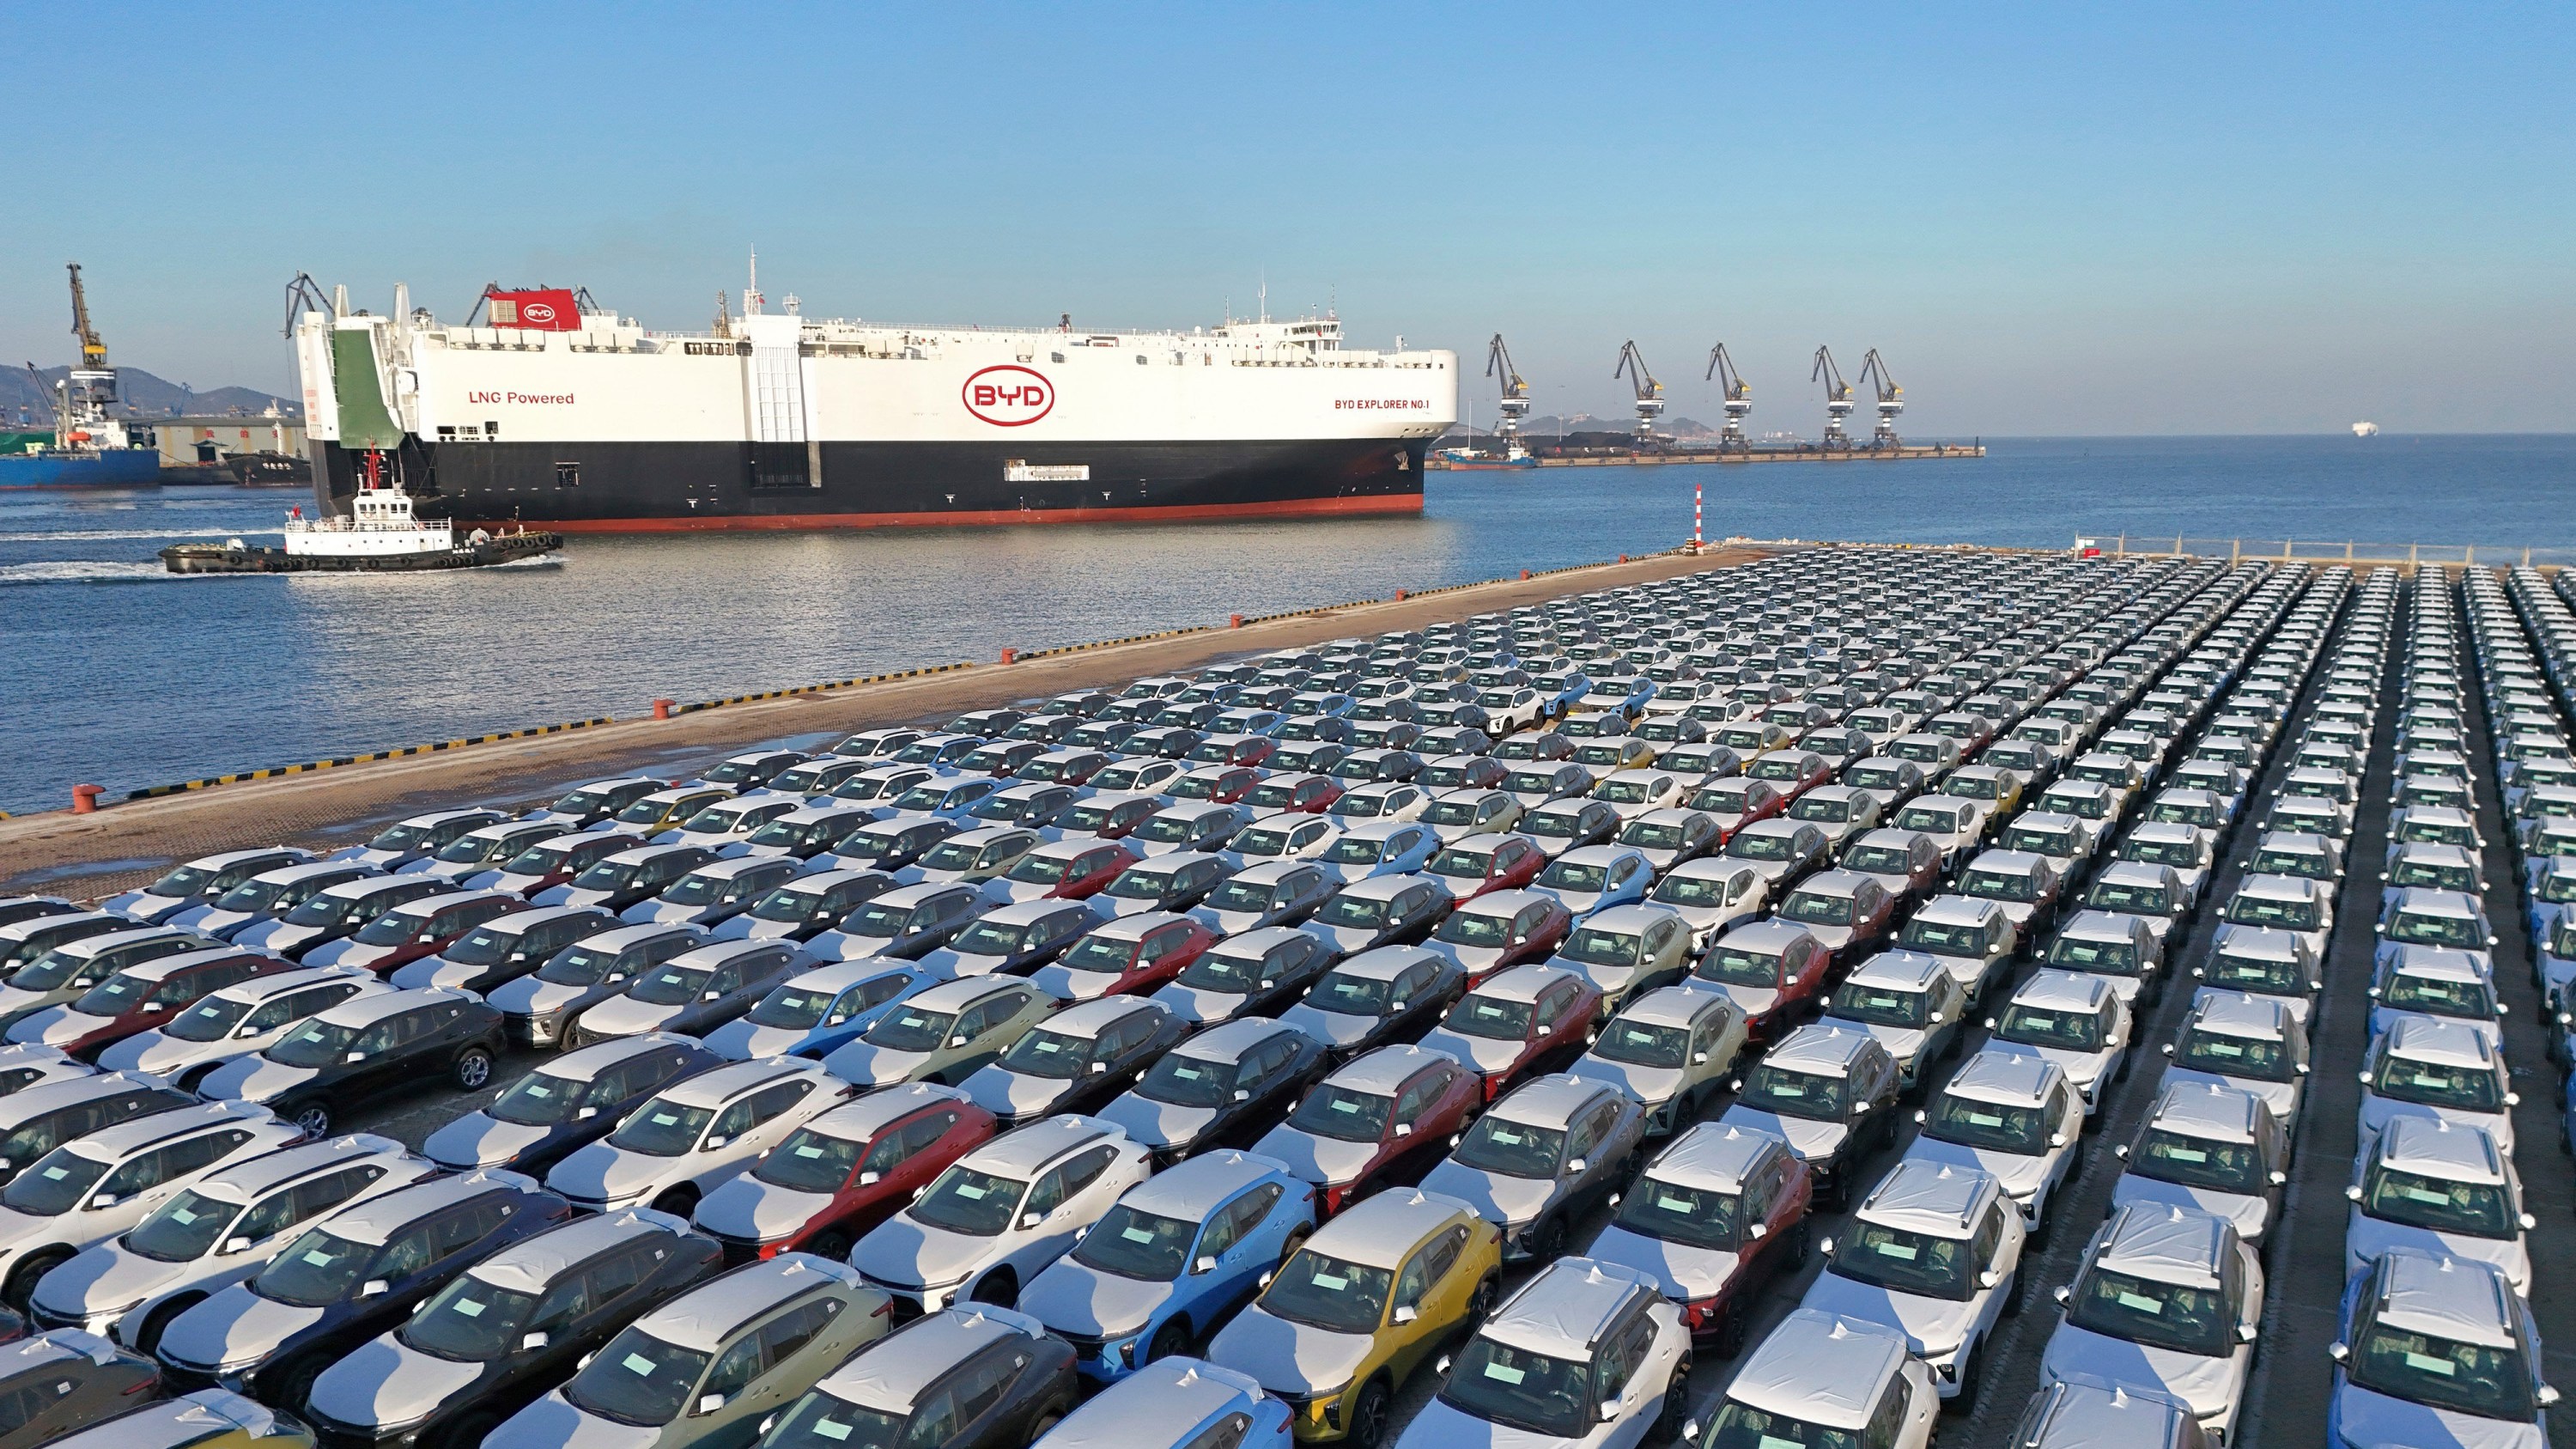 Thousands of cars are shown on a car carrier on a seaport, with a BYD freight boat in the background.